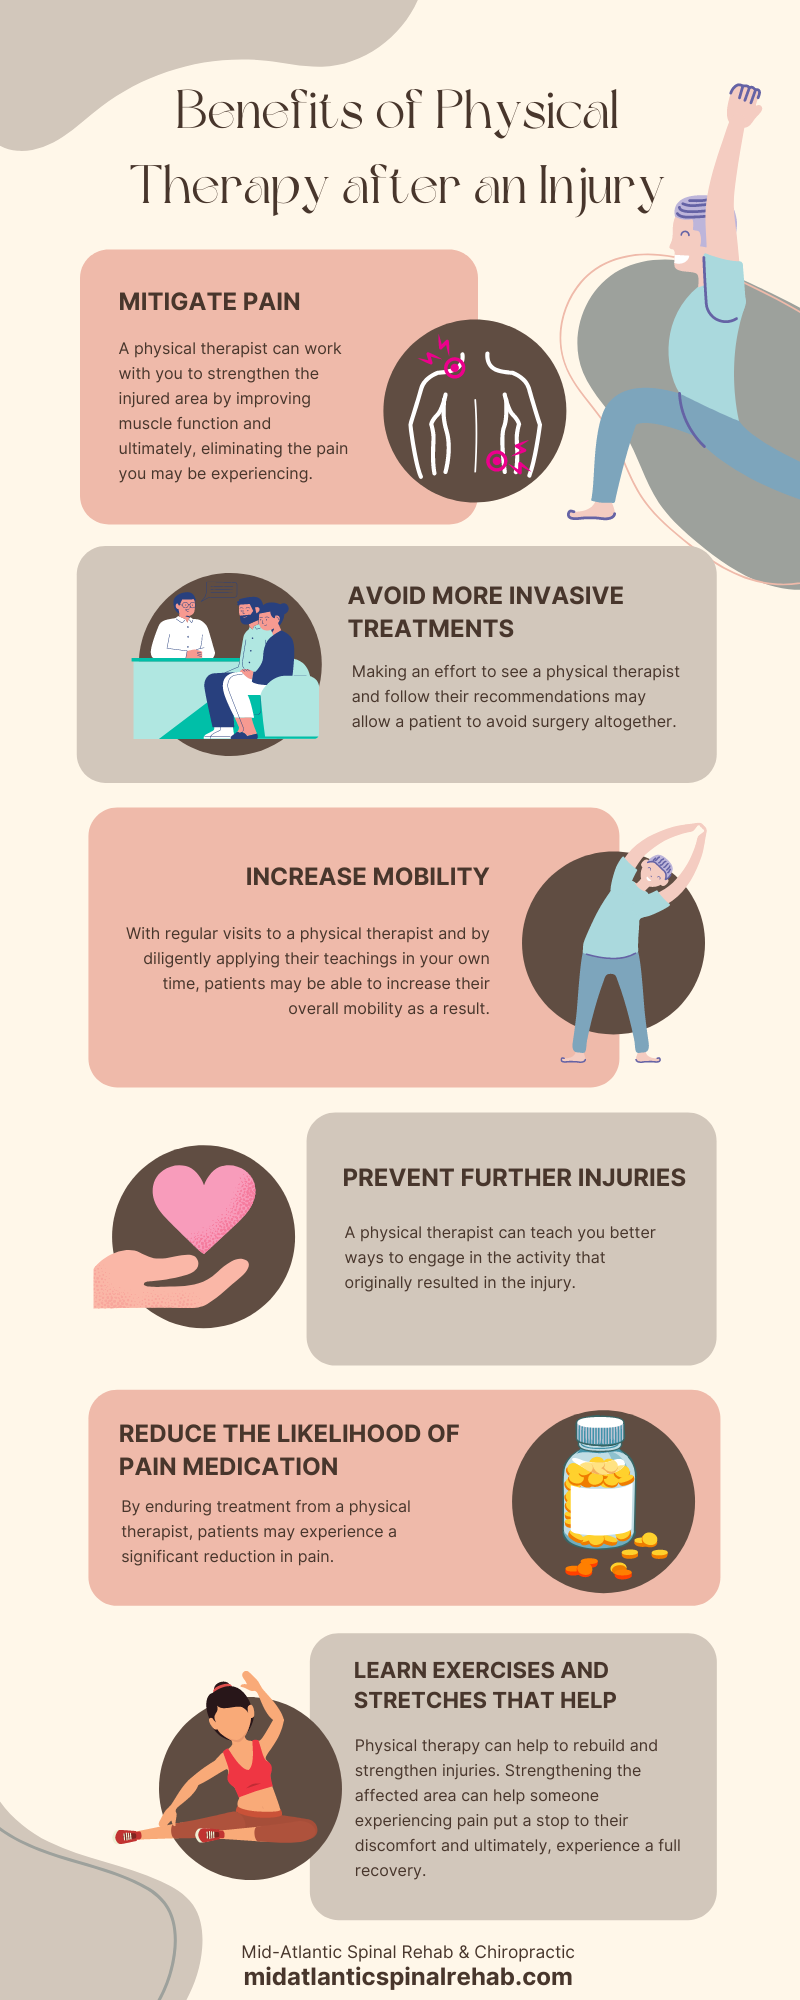 Benefits of Physical Therapy after an Injury Infographic